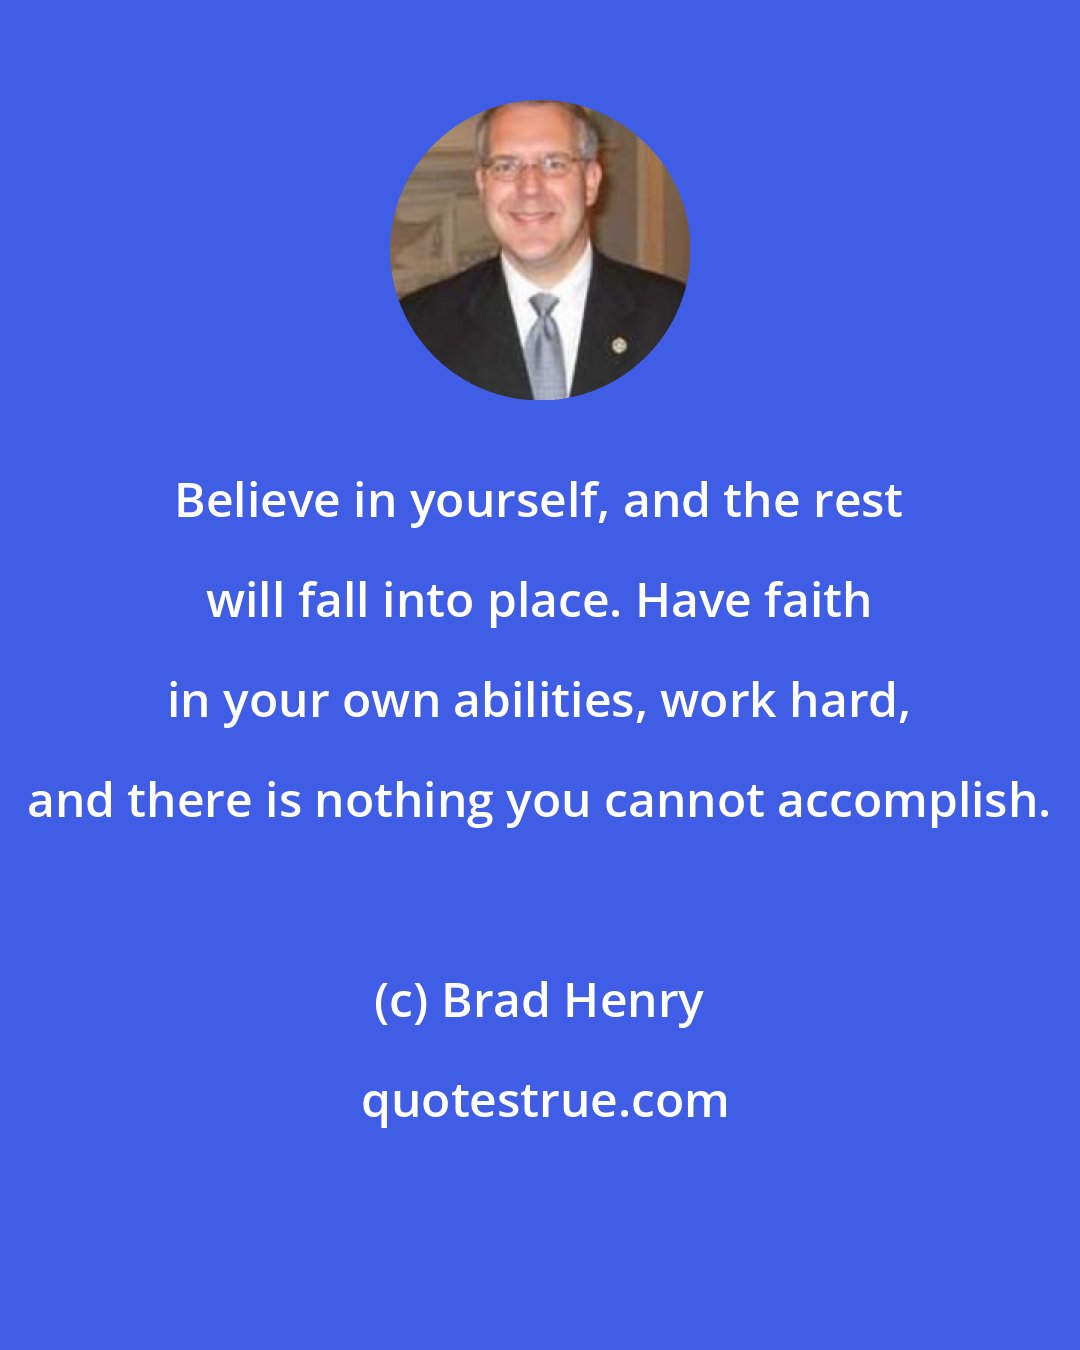 Brad Henry: Believe in yourself, and the rest will fall into place. Have faith in your own abilities, work hard, and there is nothing you cannot accomplish.